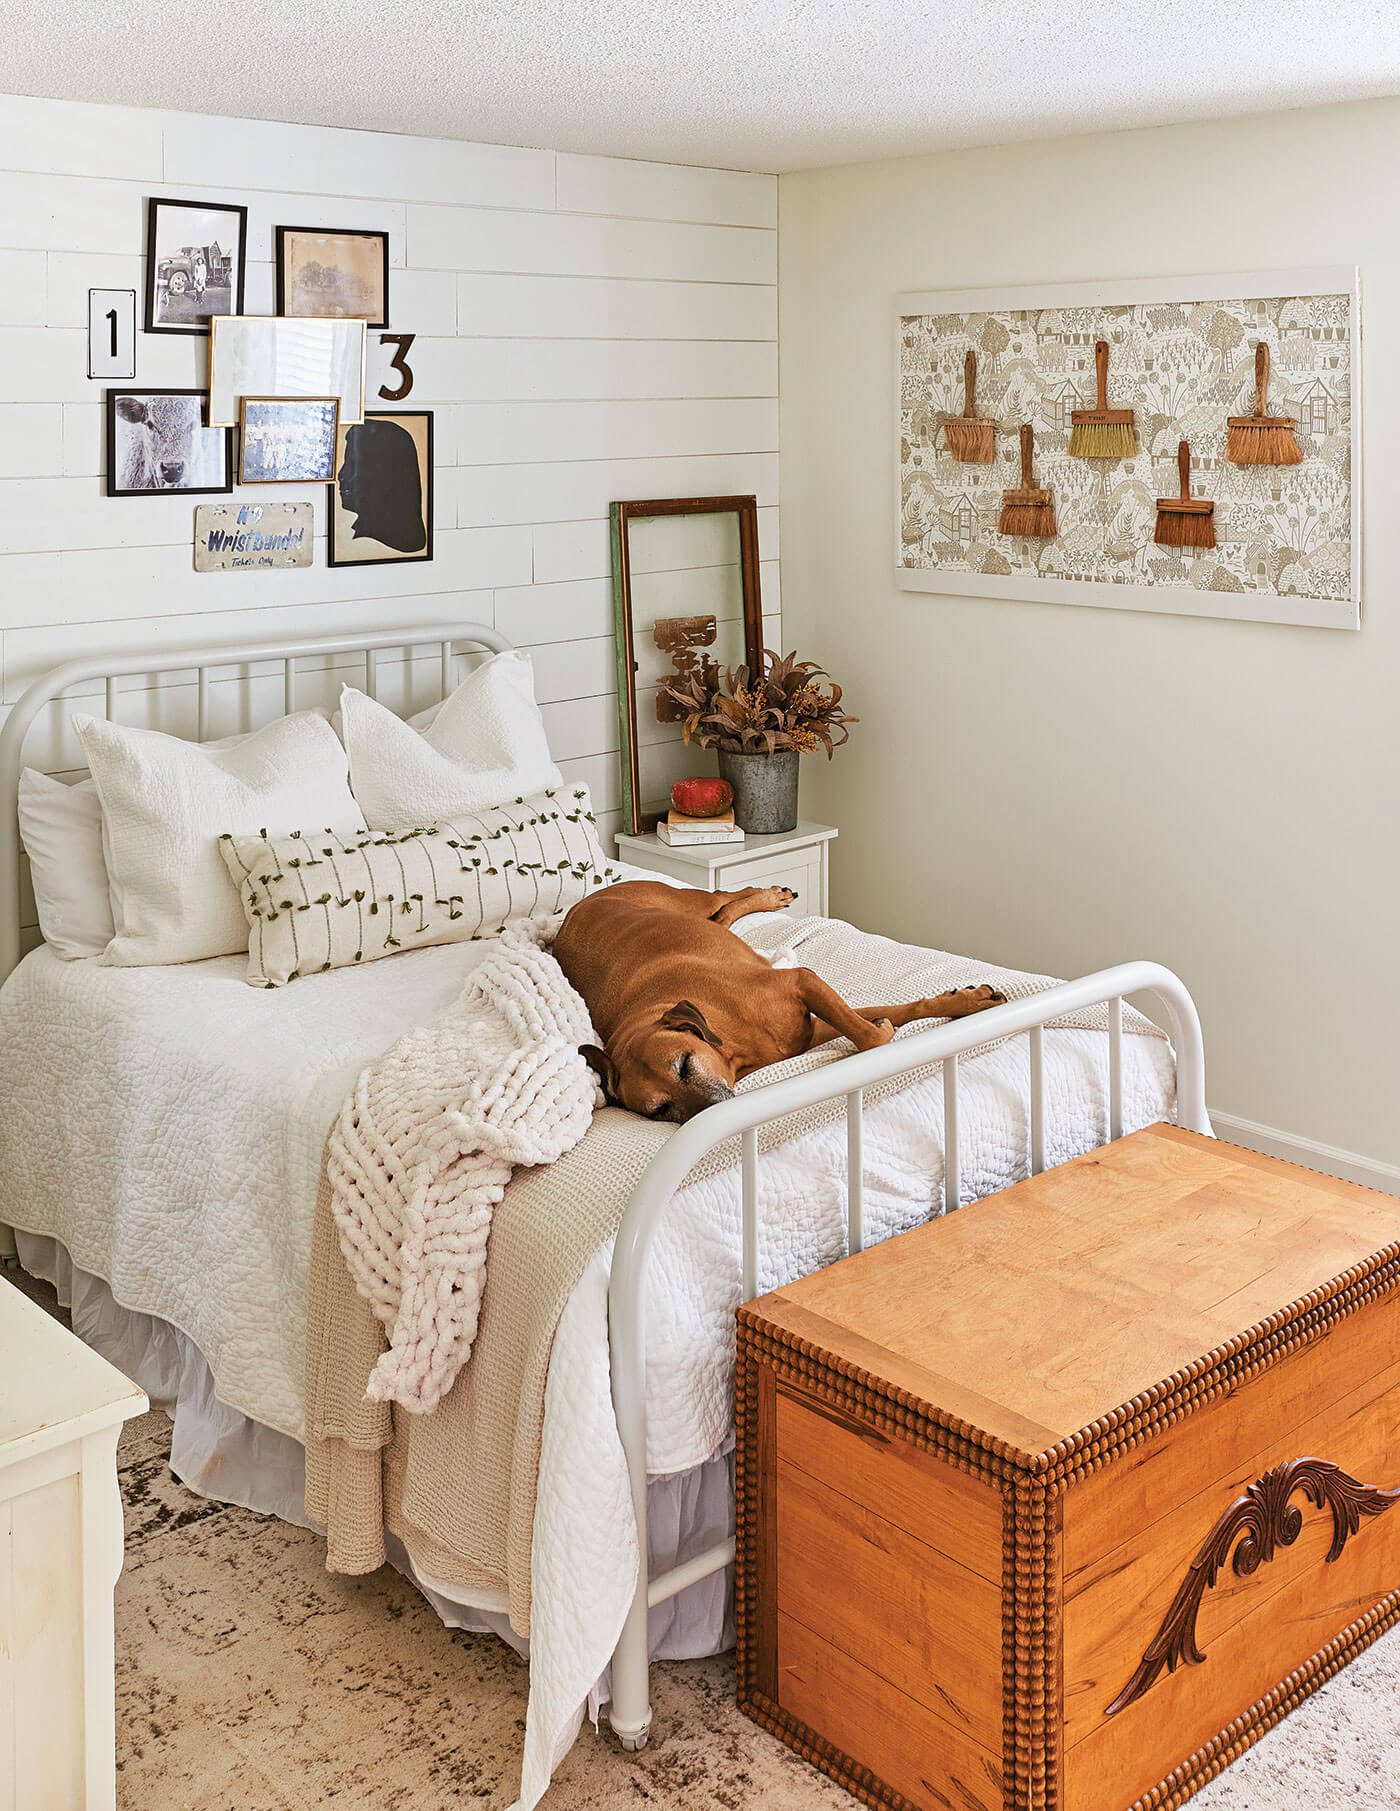 Bedroom with flea market wall decor and dog sleeping on the bed